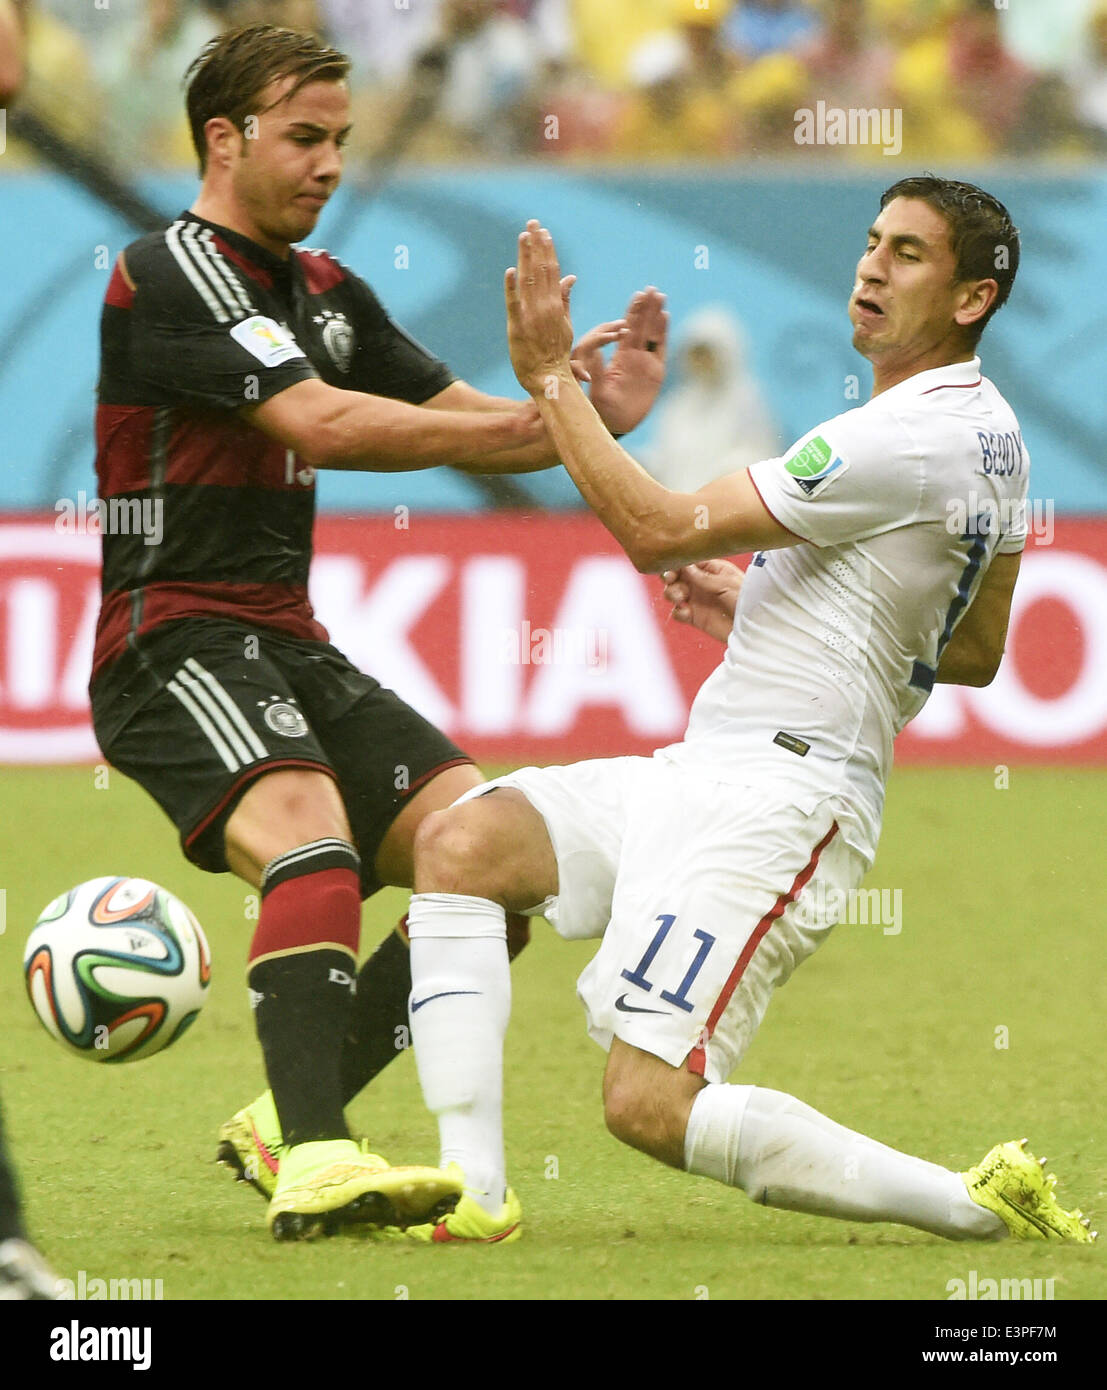 Recife, Brazil. 26th June, 2014. Alejandro Bedoya (R) of the U.S. vies with Germany's Mario Gotze during a Group G match between the U.S. and Germany of 2014 FIFA World Cup at the Arena Pernambuco Stadium in Recife, Brazil, on June 26, 2014. Germany won 1-0 over the U.S. on Thursday. Germany and the U.S. enter Round of 16 from Group G. Credit:  Lui Siu Wai/Xinhua/Alamy Live News Stock Photo